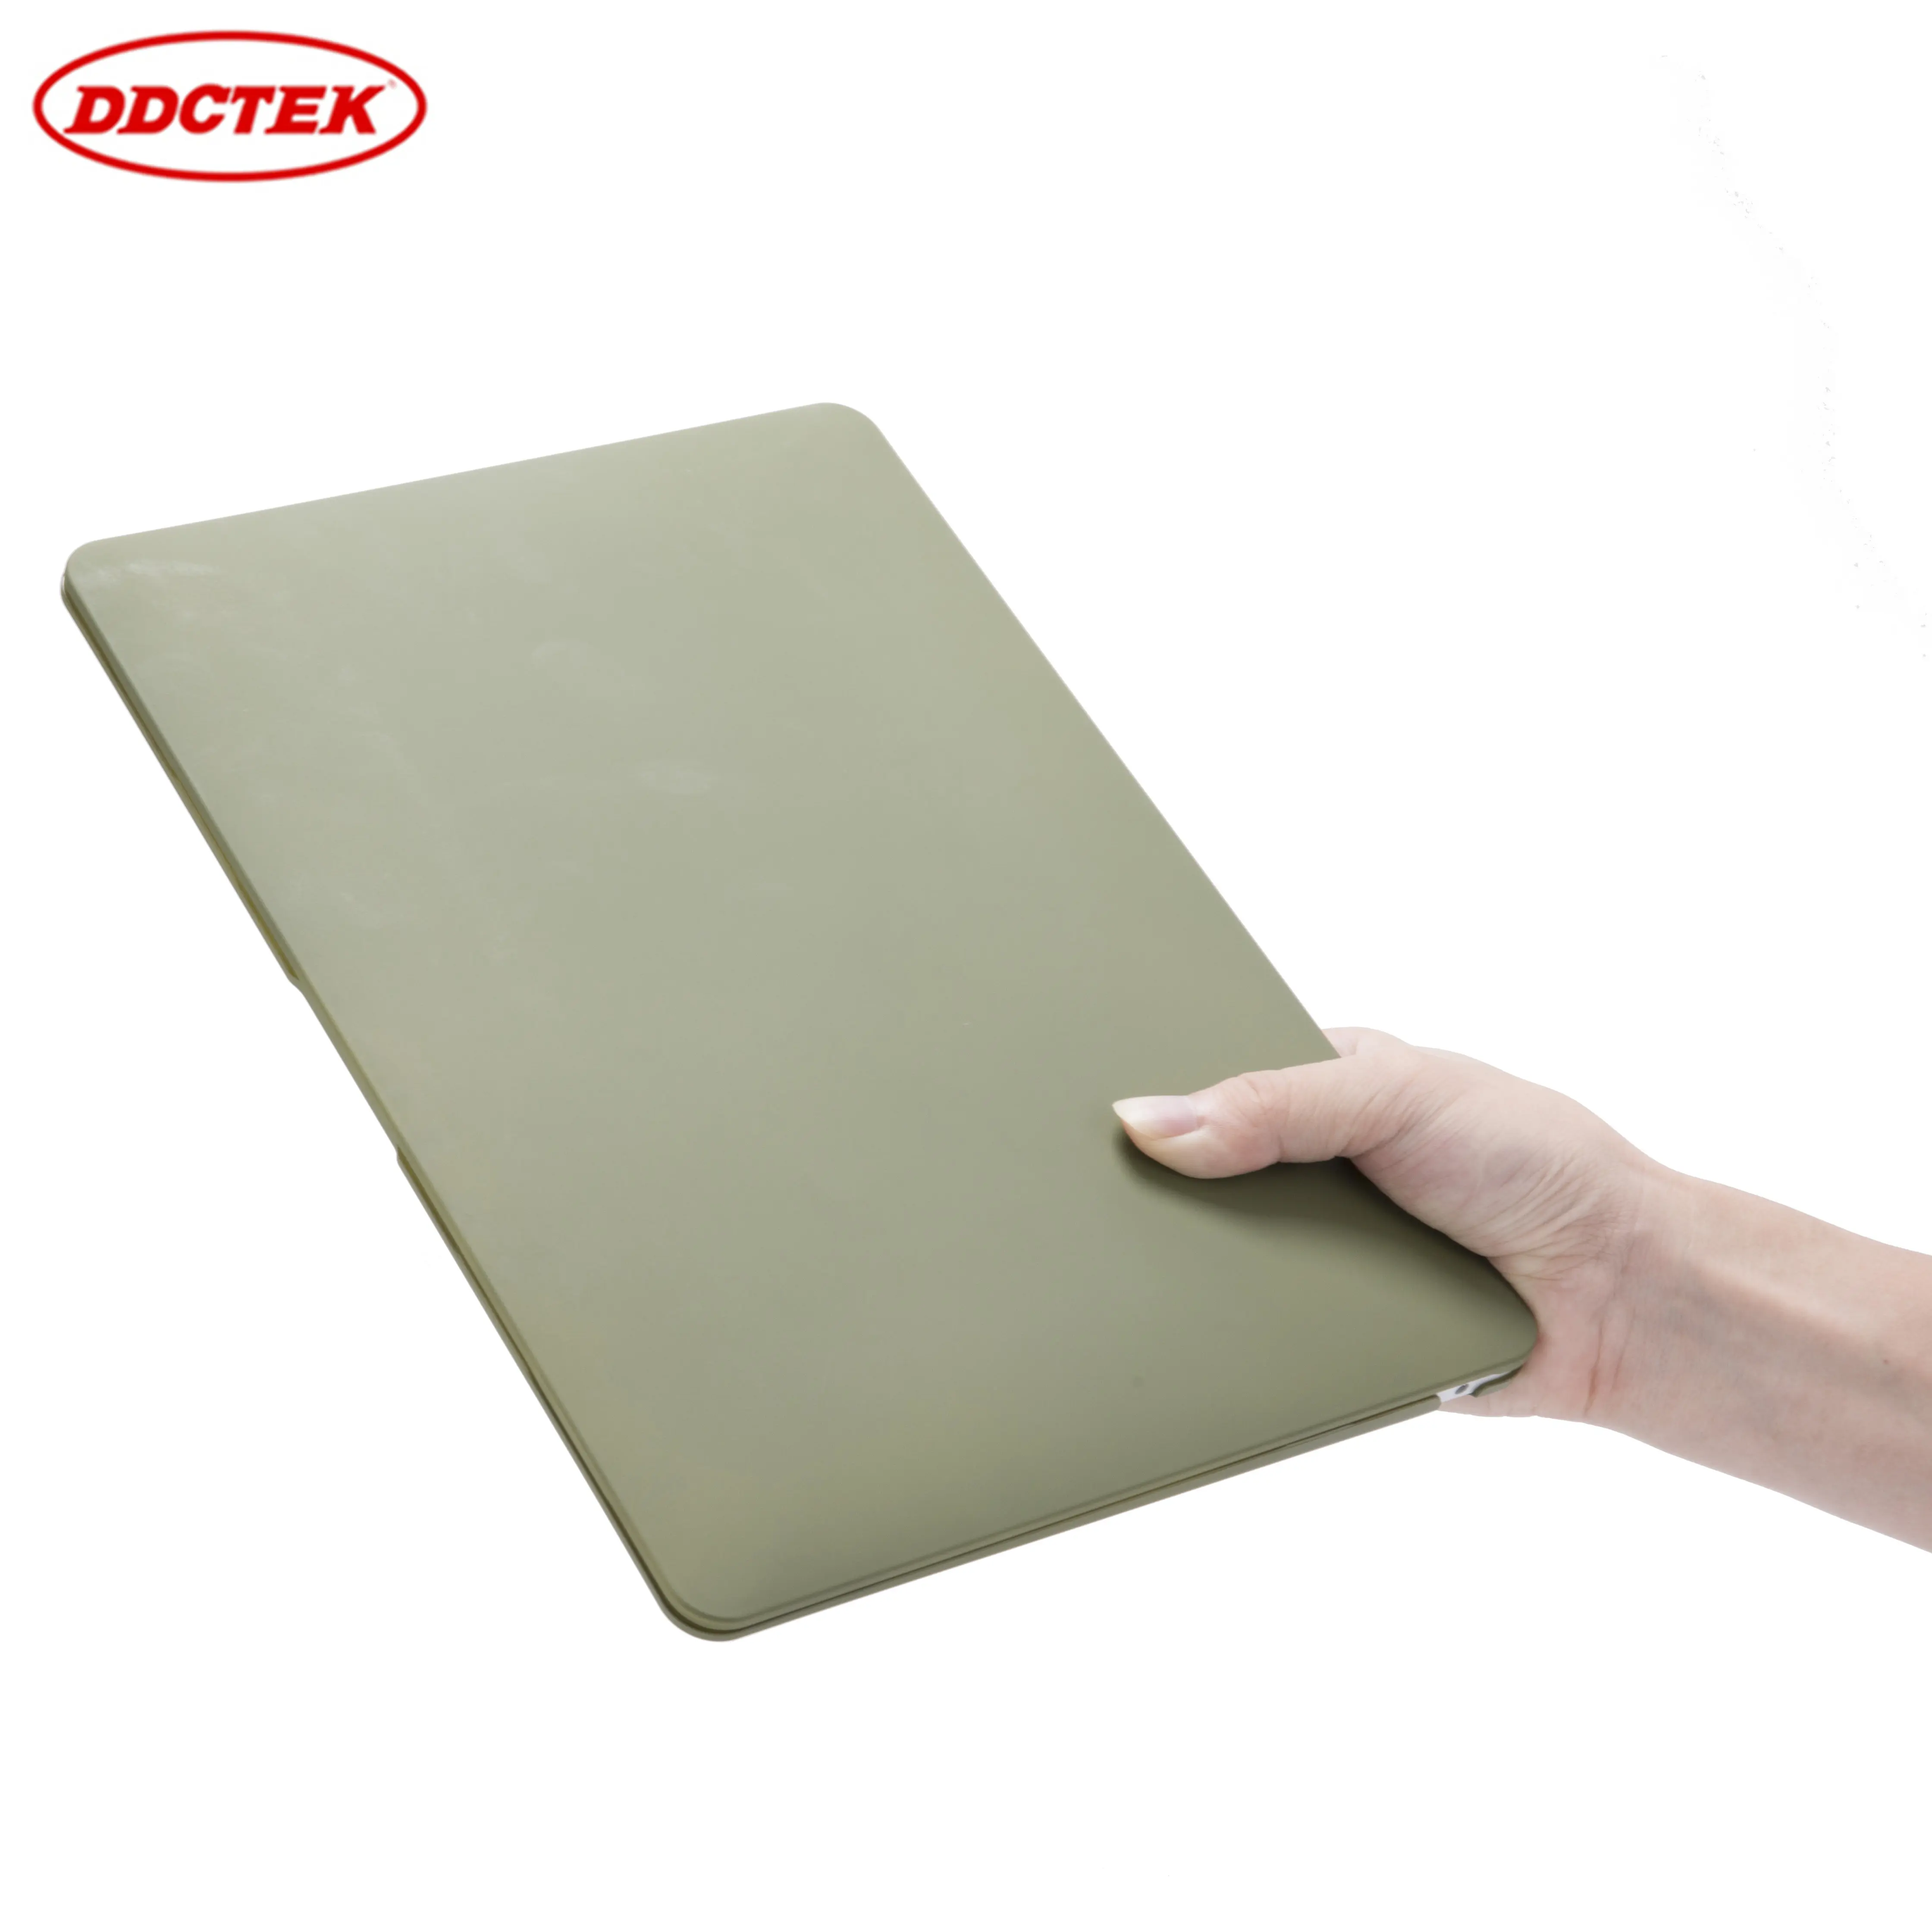 Detachable custom plastic case cream frosted hard shell laptop cover for apple macbook pro as accessories